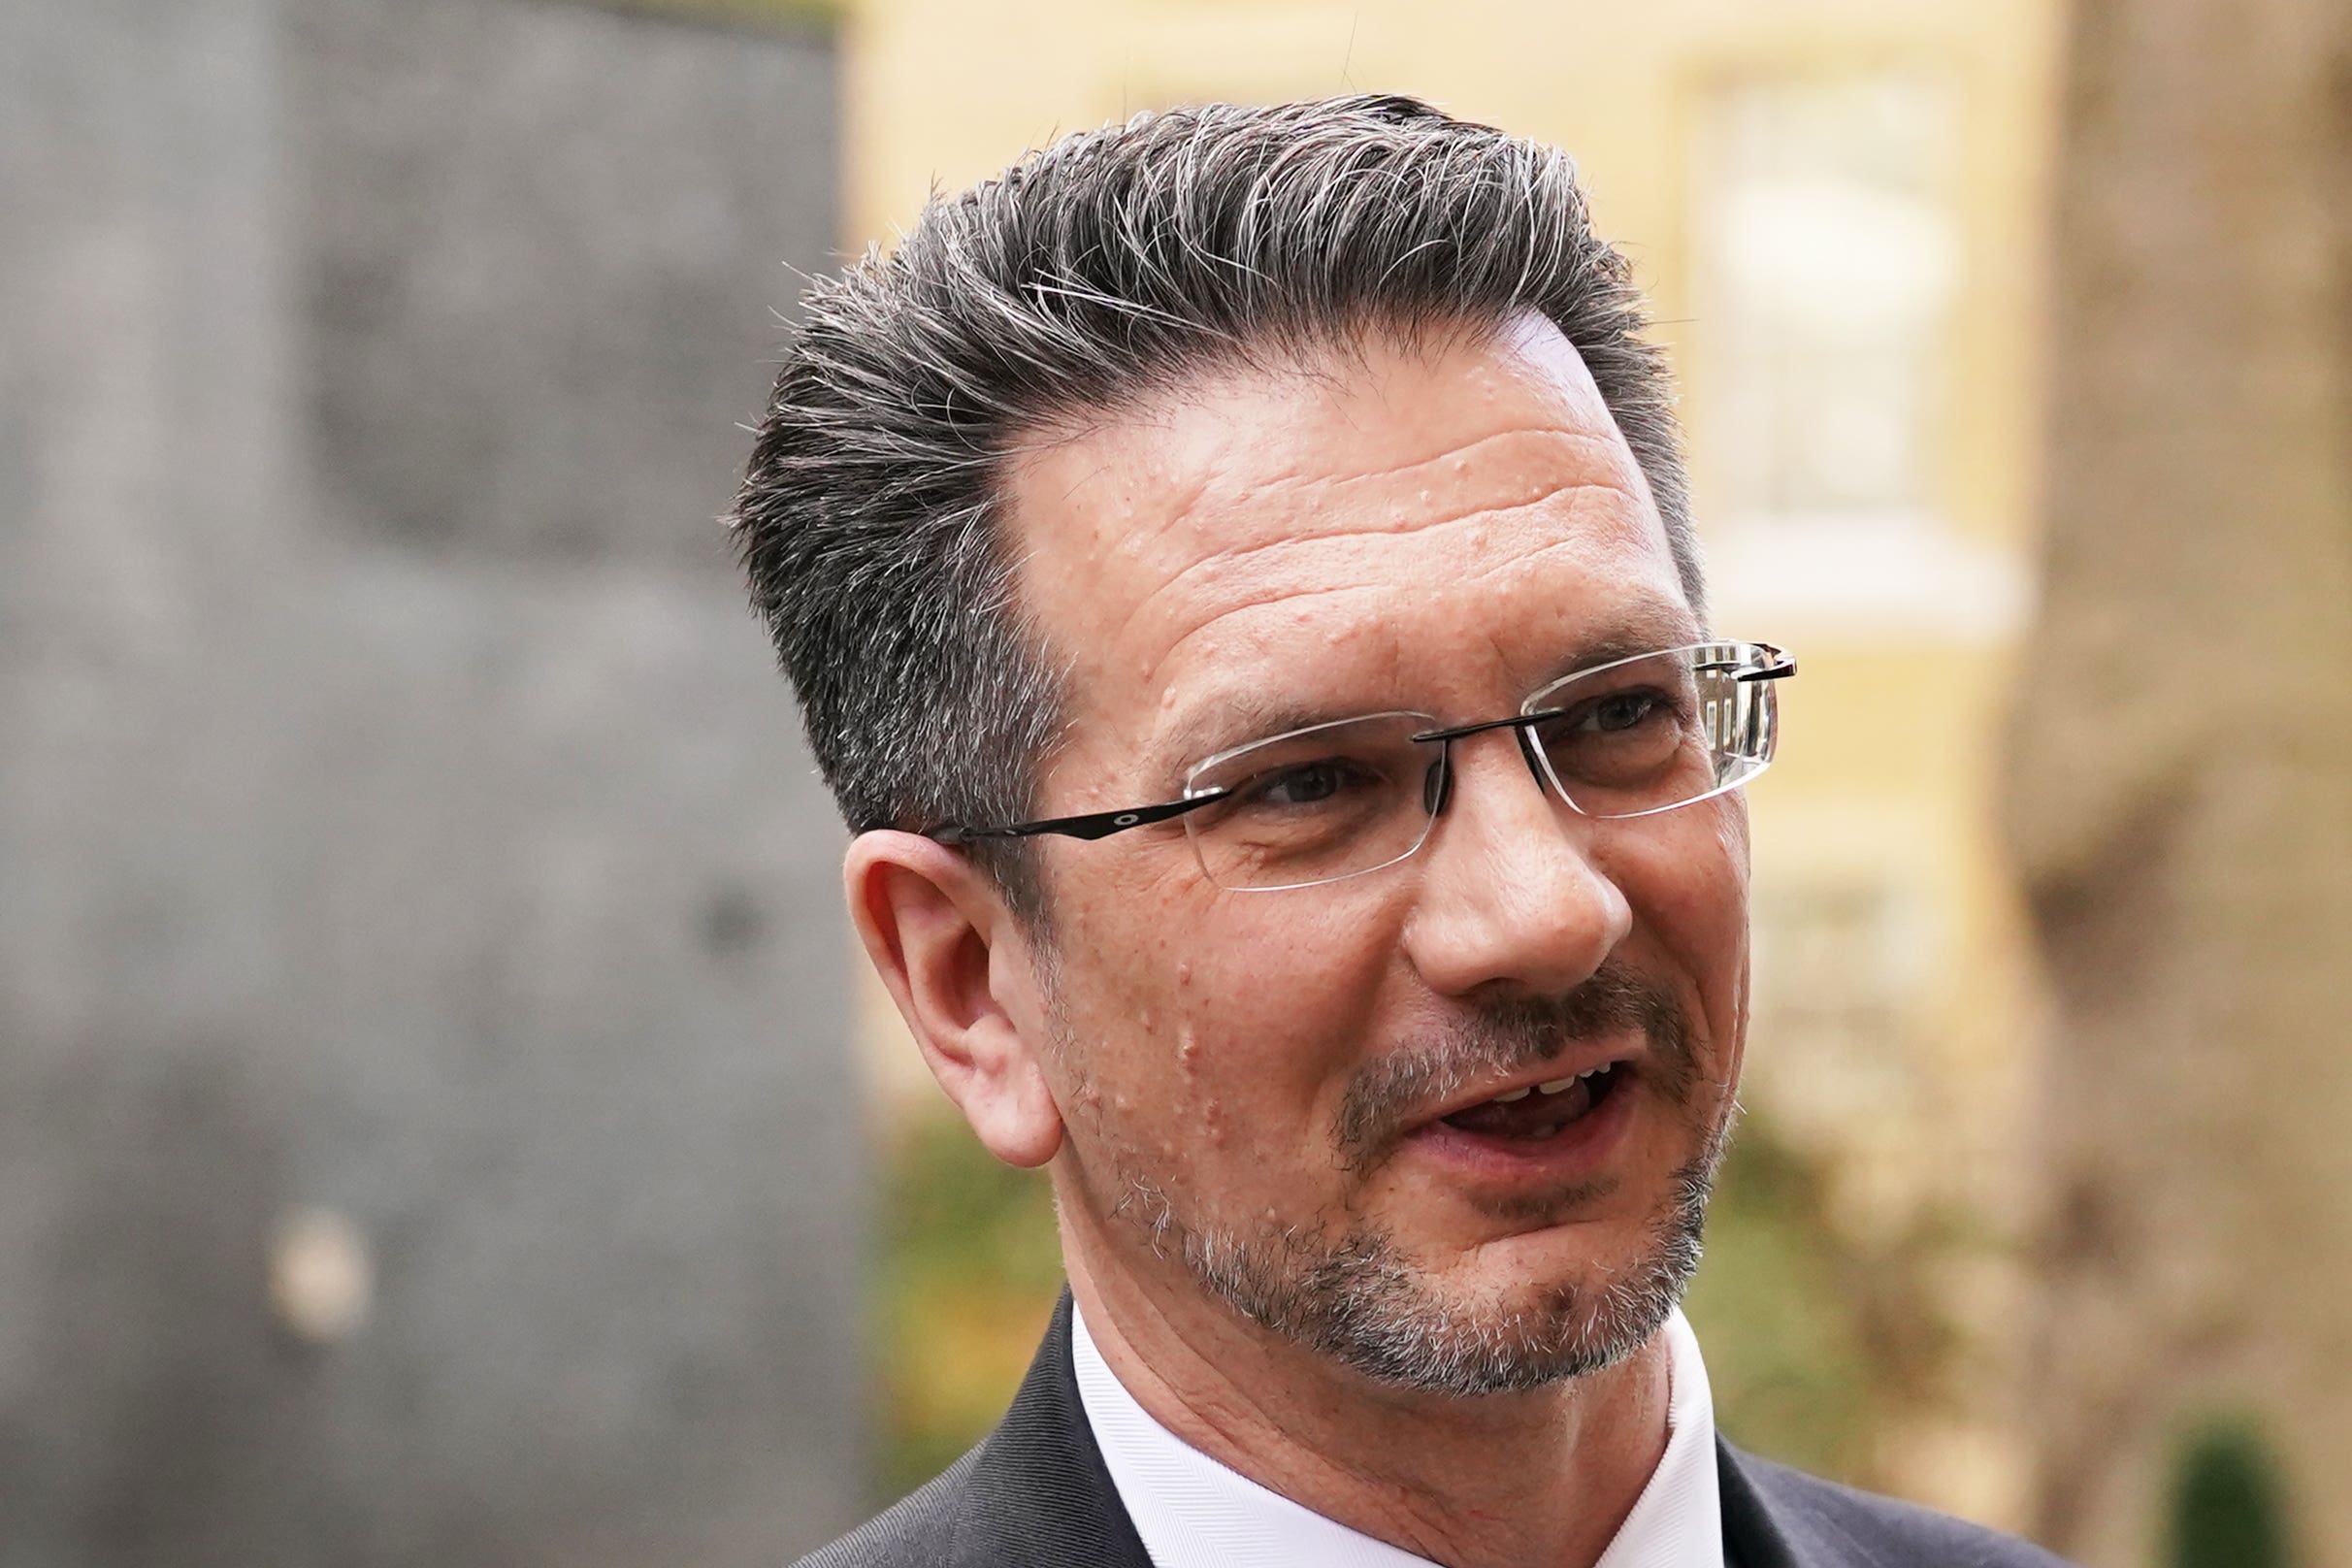 Steve Baker, Northern Ireland minister and Brexit purist